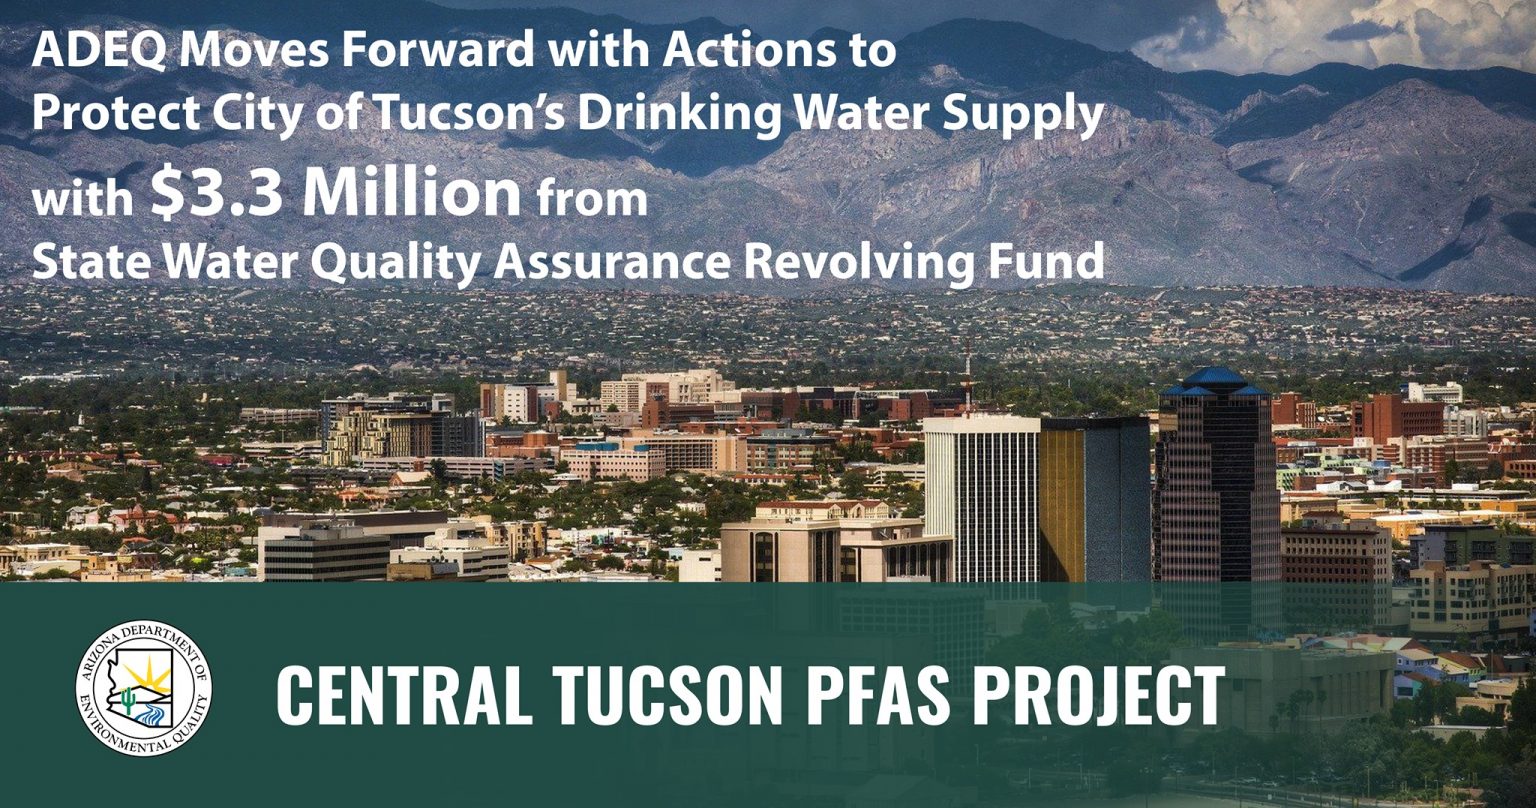 ADEQ to Protect the City of Tucson’s Drinking Water Supply SAEMS